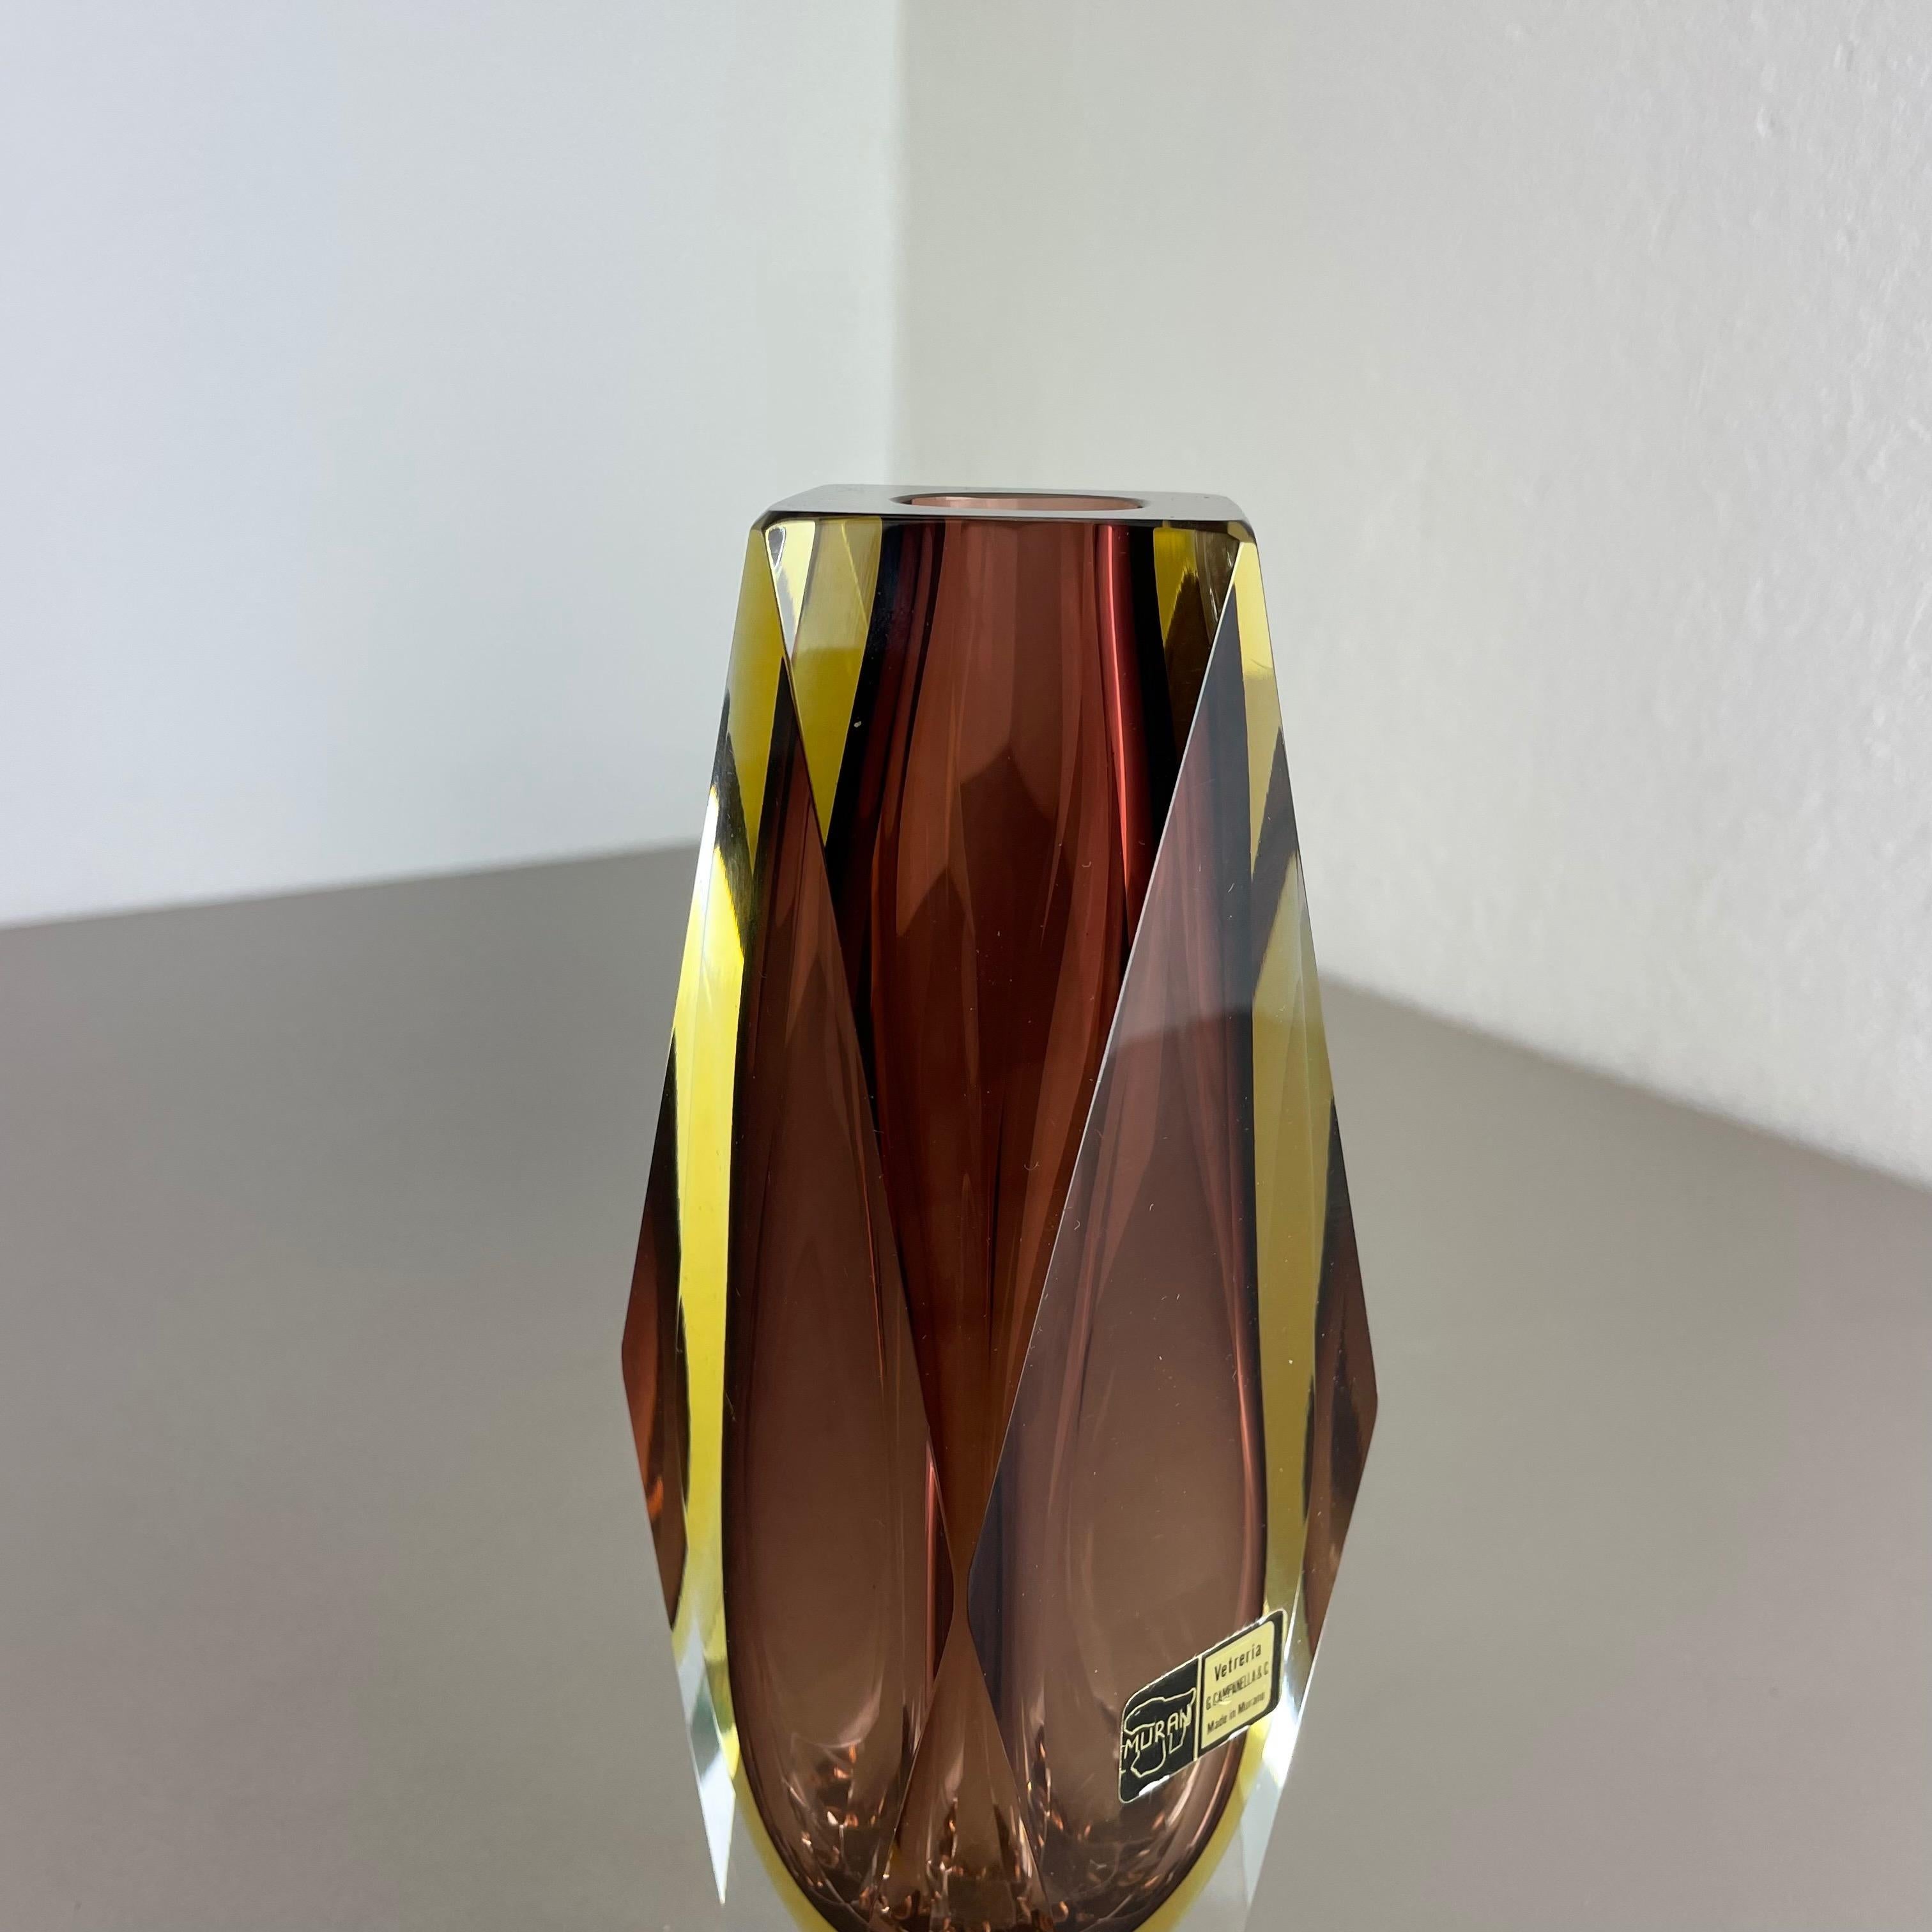 Large 1.3kg Mandruzzato Murano Glass Sommerso Vases by G. Campanella, Italy In Good Condition For Sale In Kirchlengern, DE